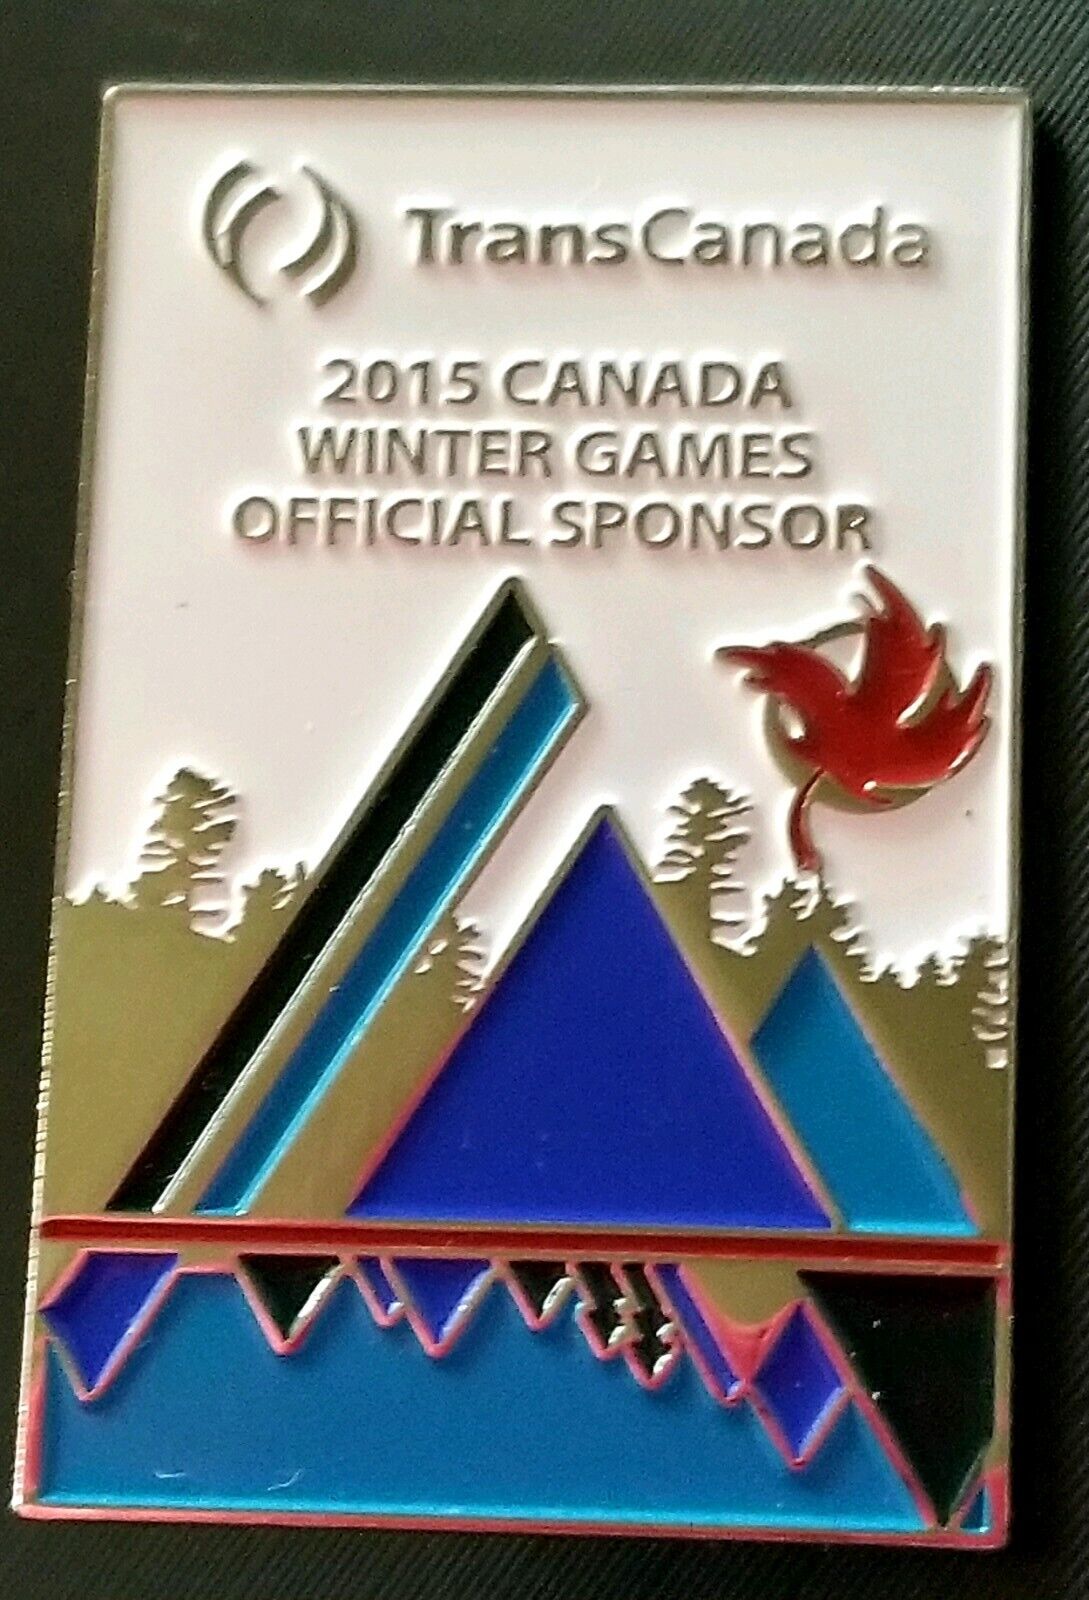 Prince George Canada 2015 Winter Games TRANSCANADA   official sponsor pin